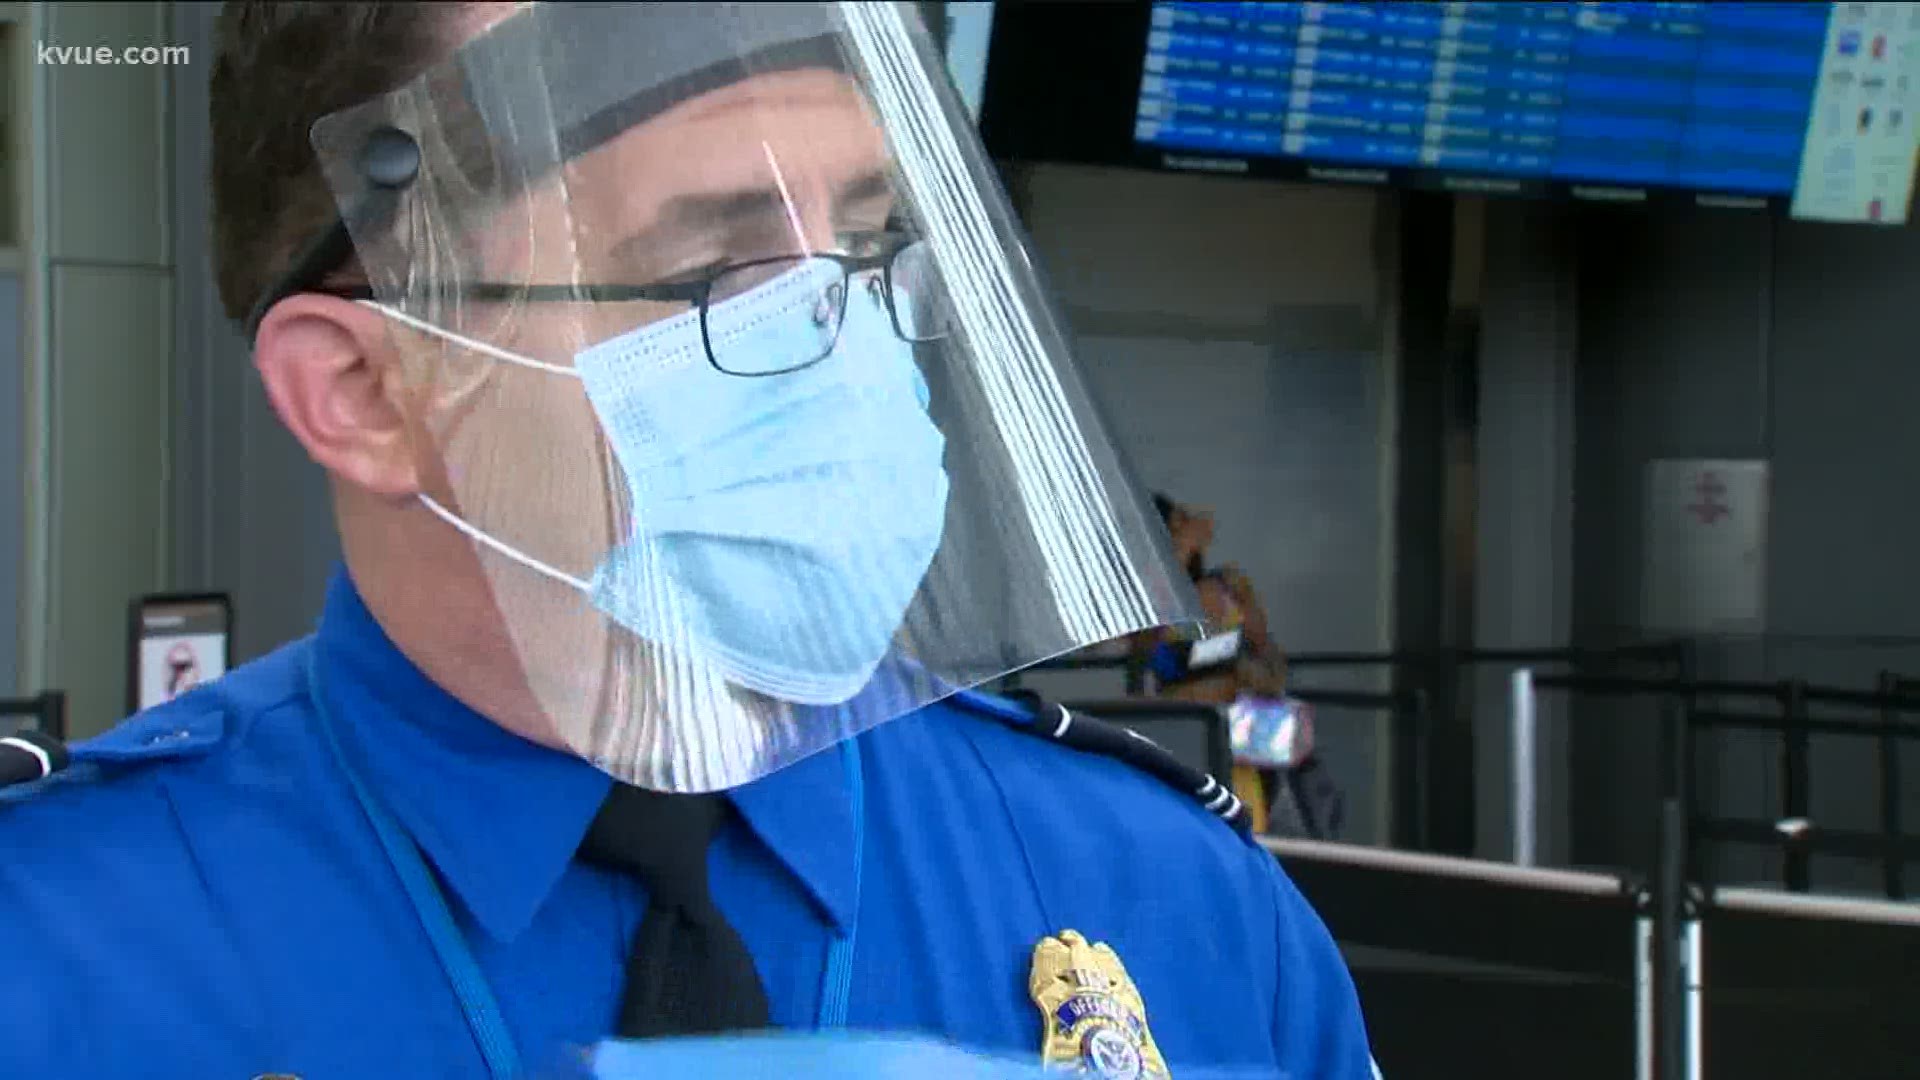 TSA is taking extra precautions that you'll need to know about before you fly.